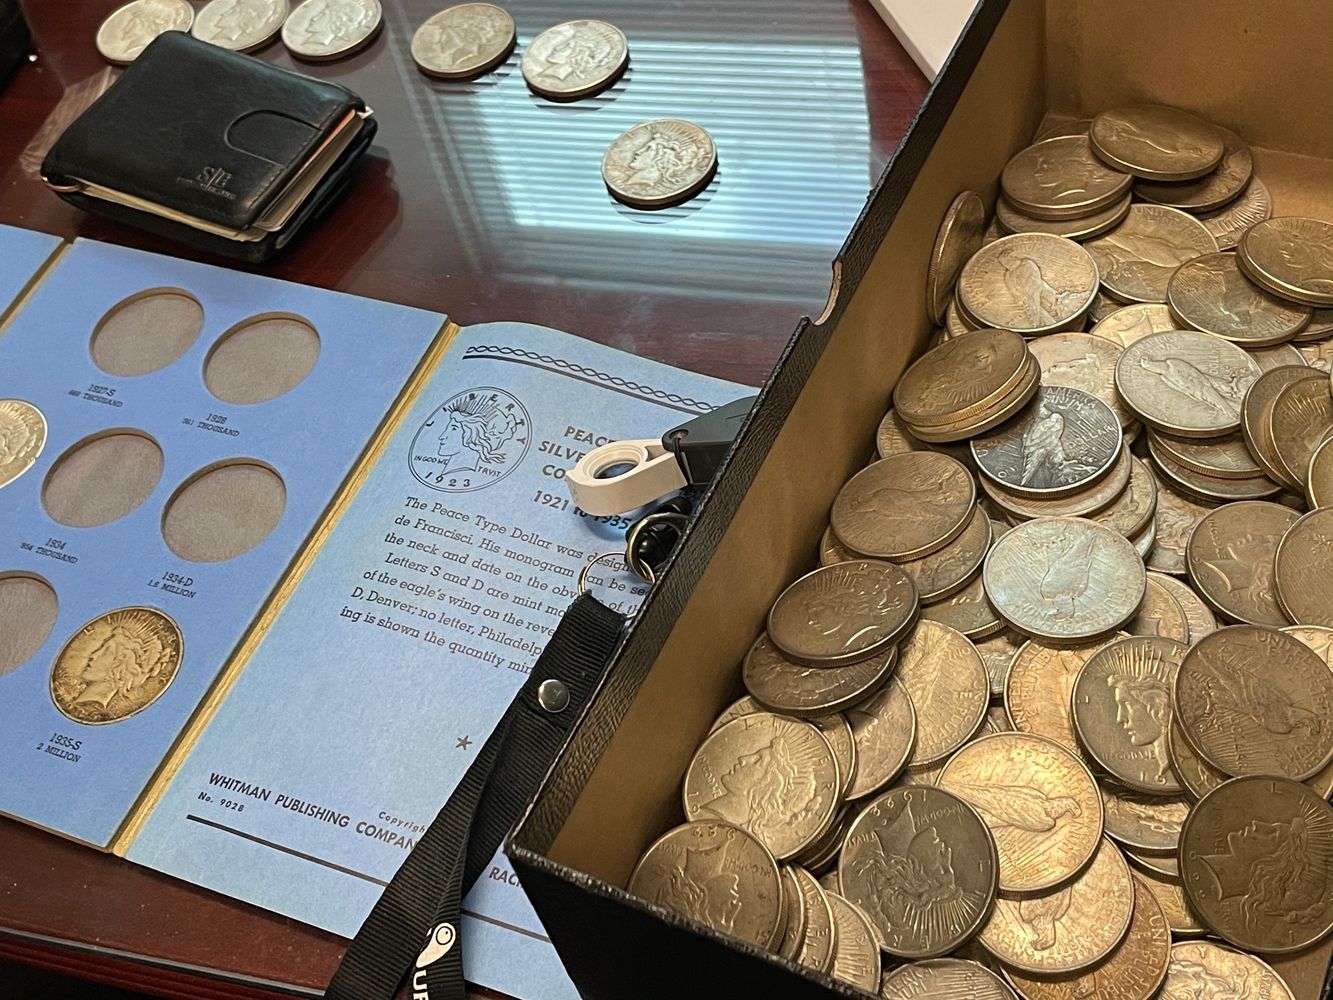 Rare coins pressed into Whitman blue folders are often found in inherited coin collections.